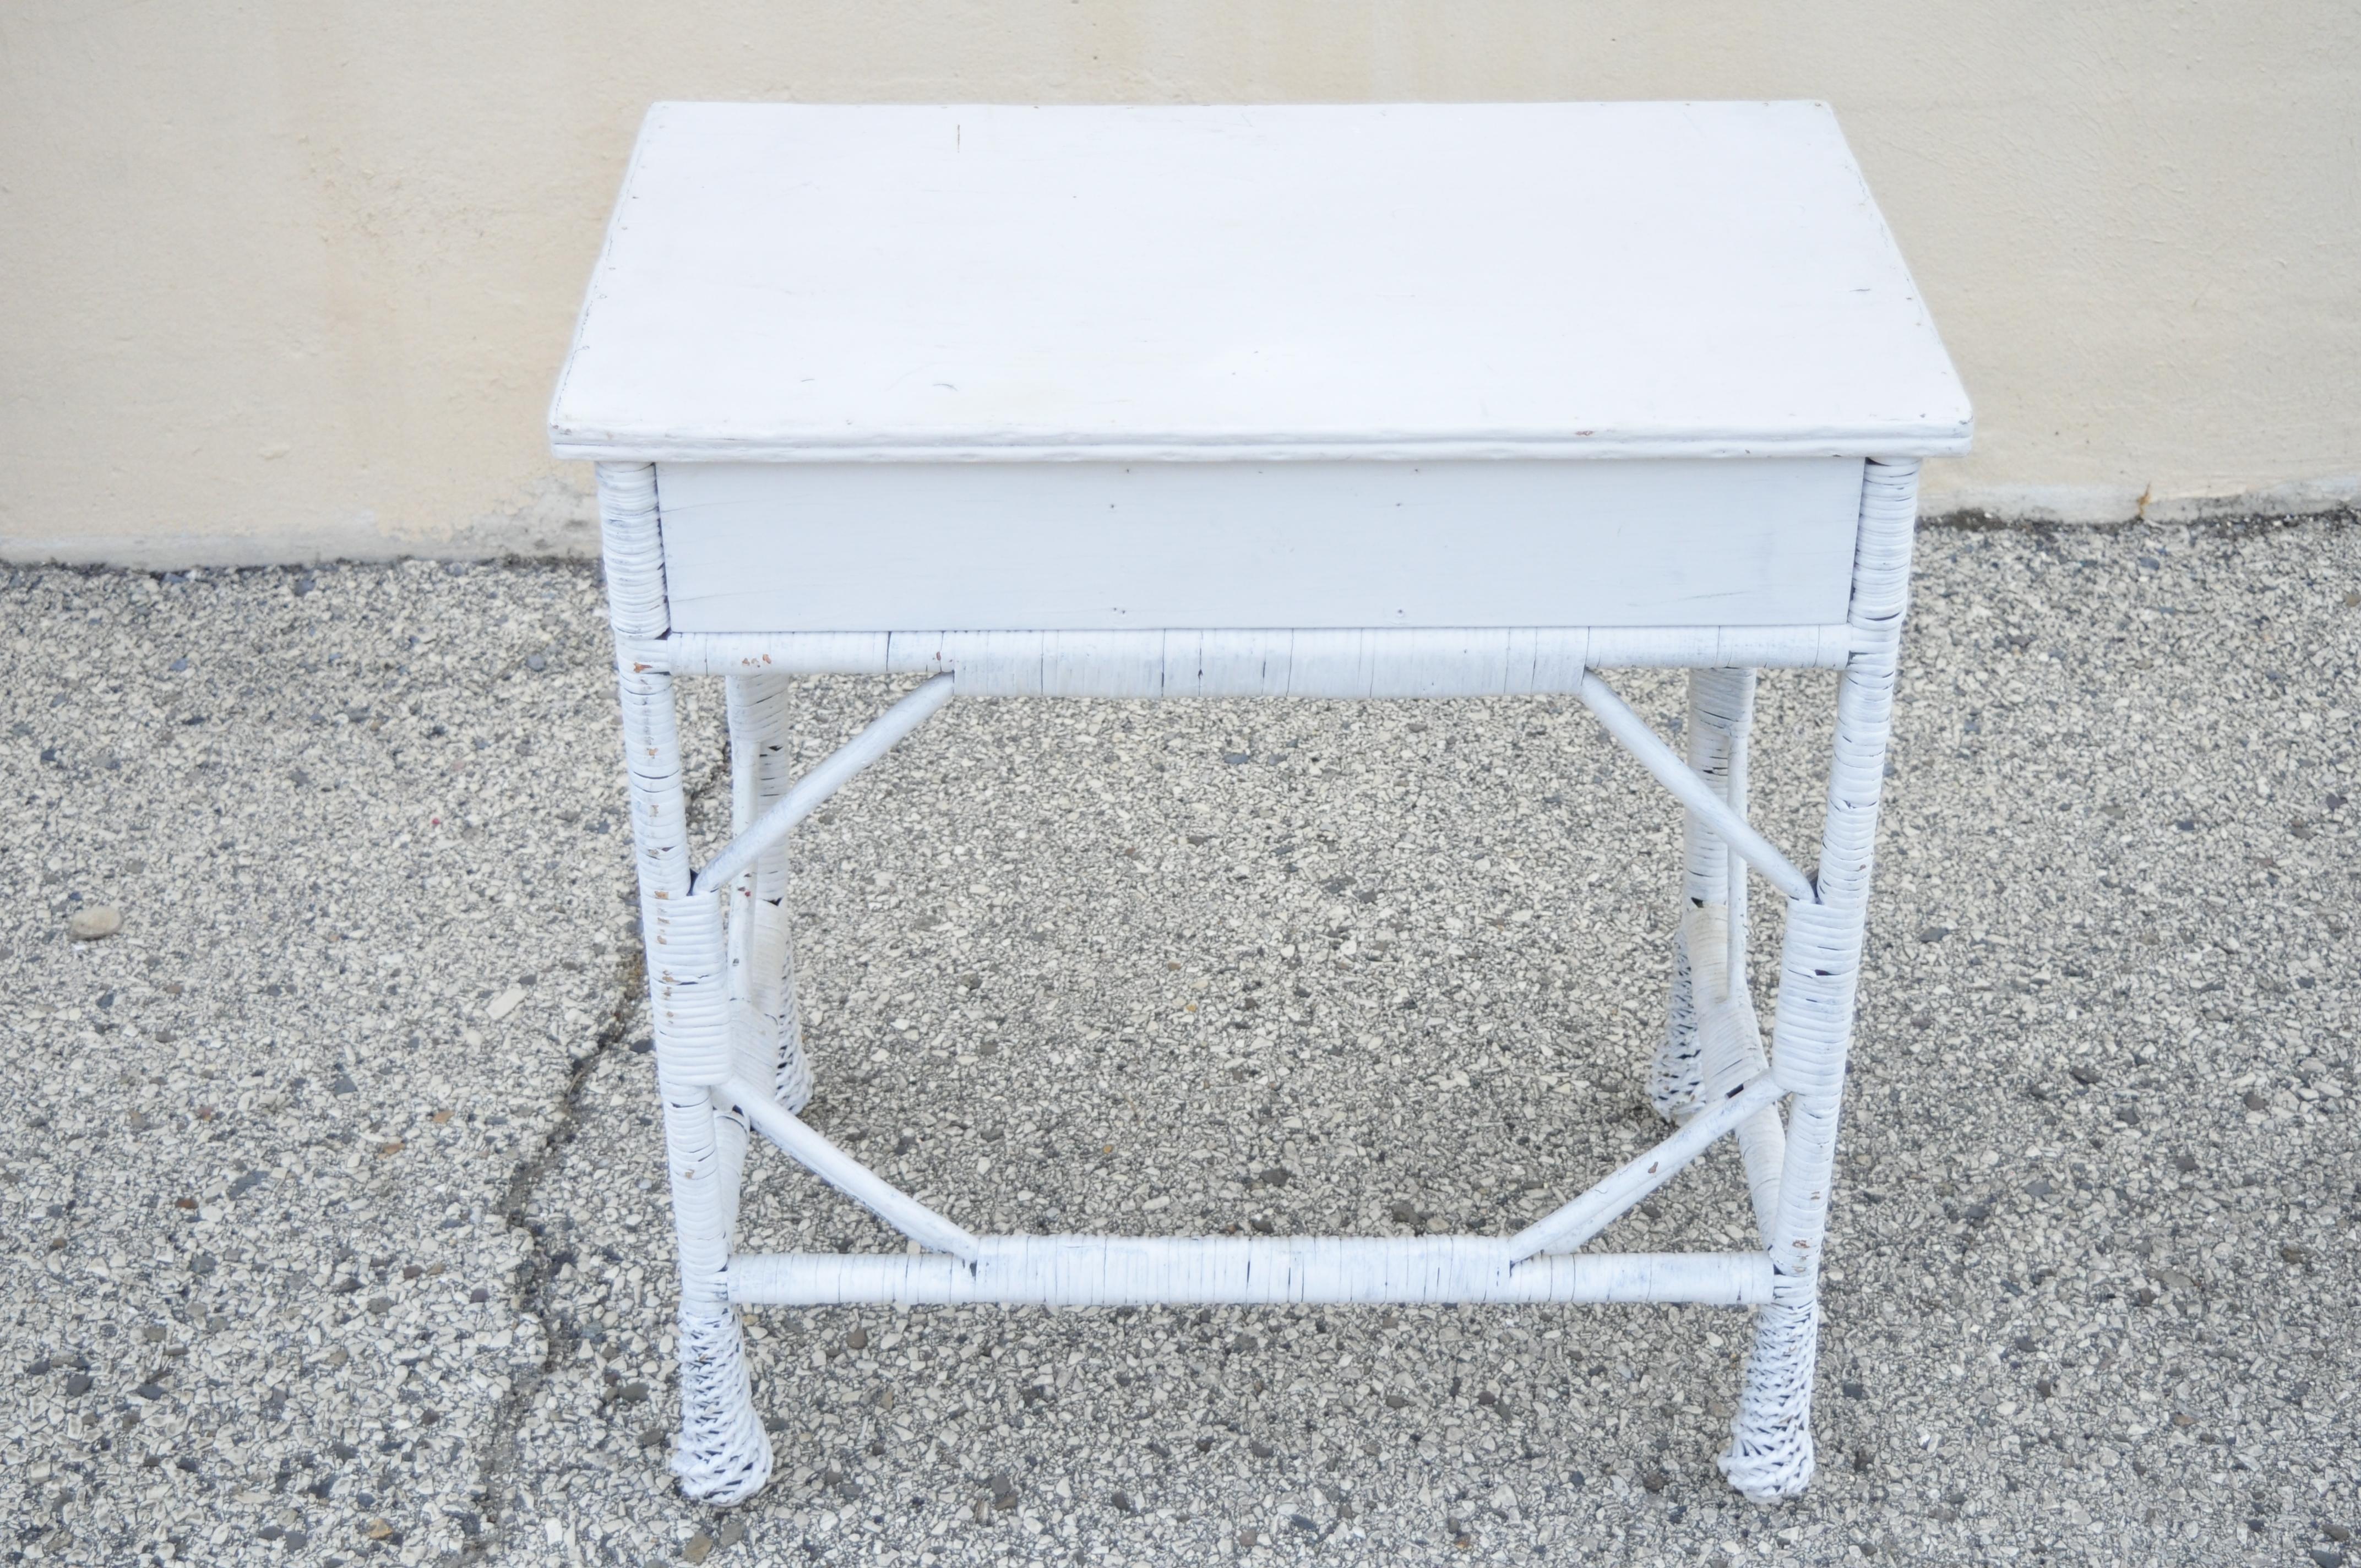 Antique Victorian White Wicker Rattan Small Vanity Writing Desk Table 2 Drawers 2